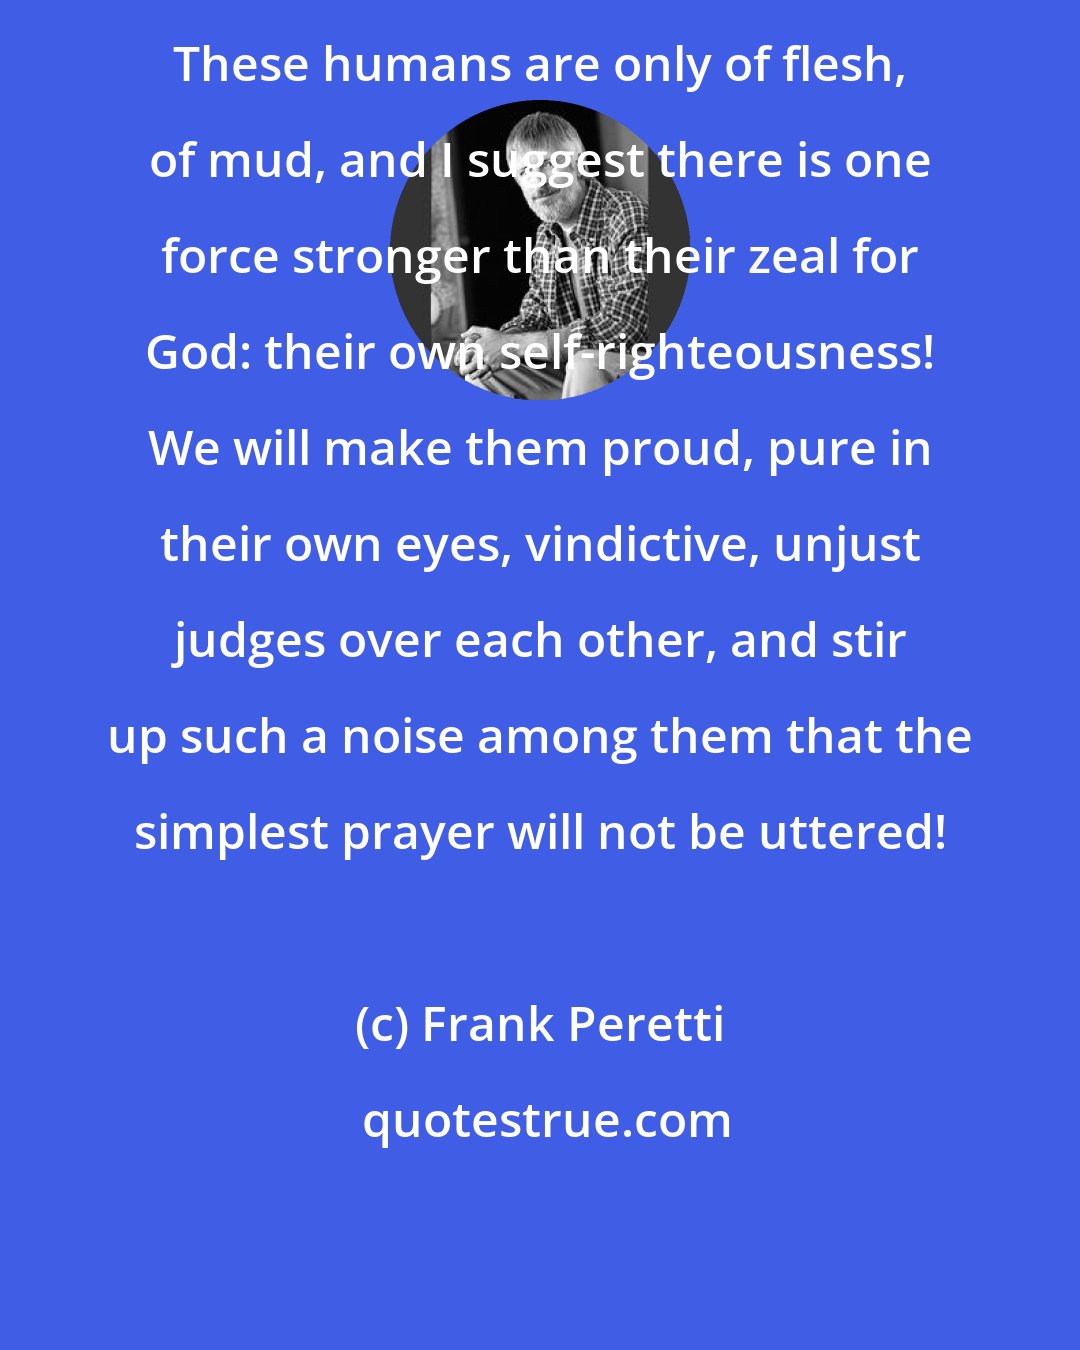 Frank Peretti: These humans are only of flesh, of mud, and I suggest there is one force stronger than their zeal for God: their own self-righteousness! We will make them proud, pure in their own eyes, vindictive, unjust judges over each other, and stir up such a noise among them that the simplest prayer will not be uttered!